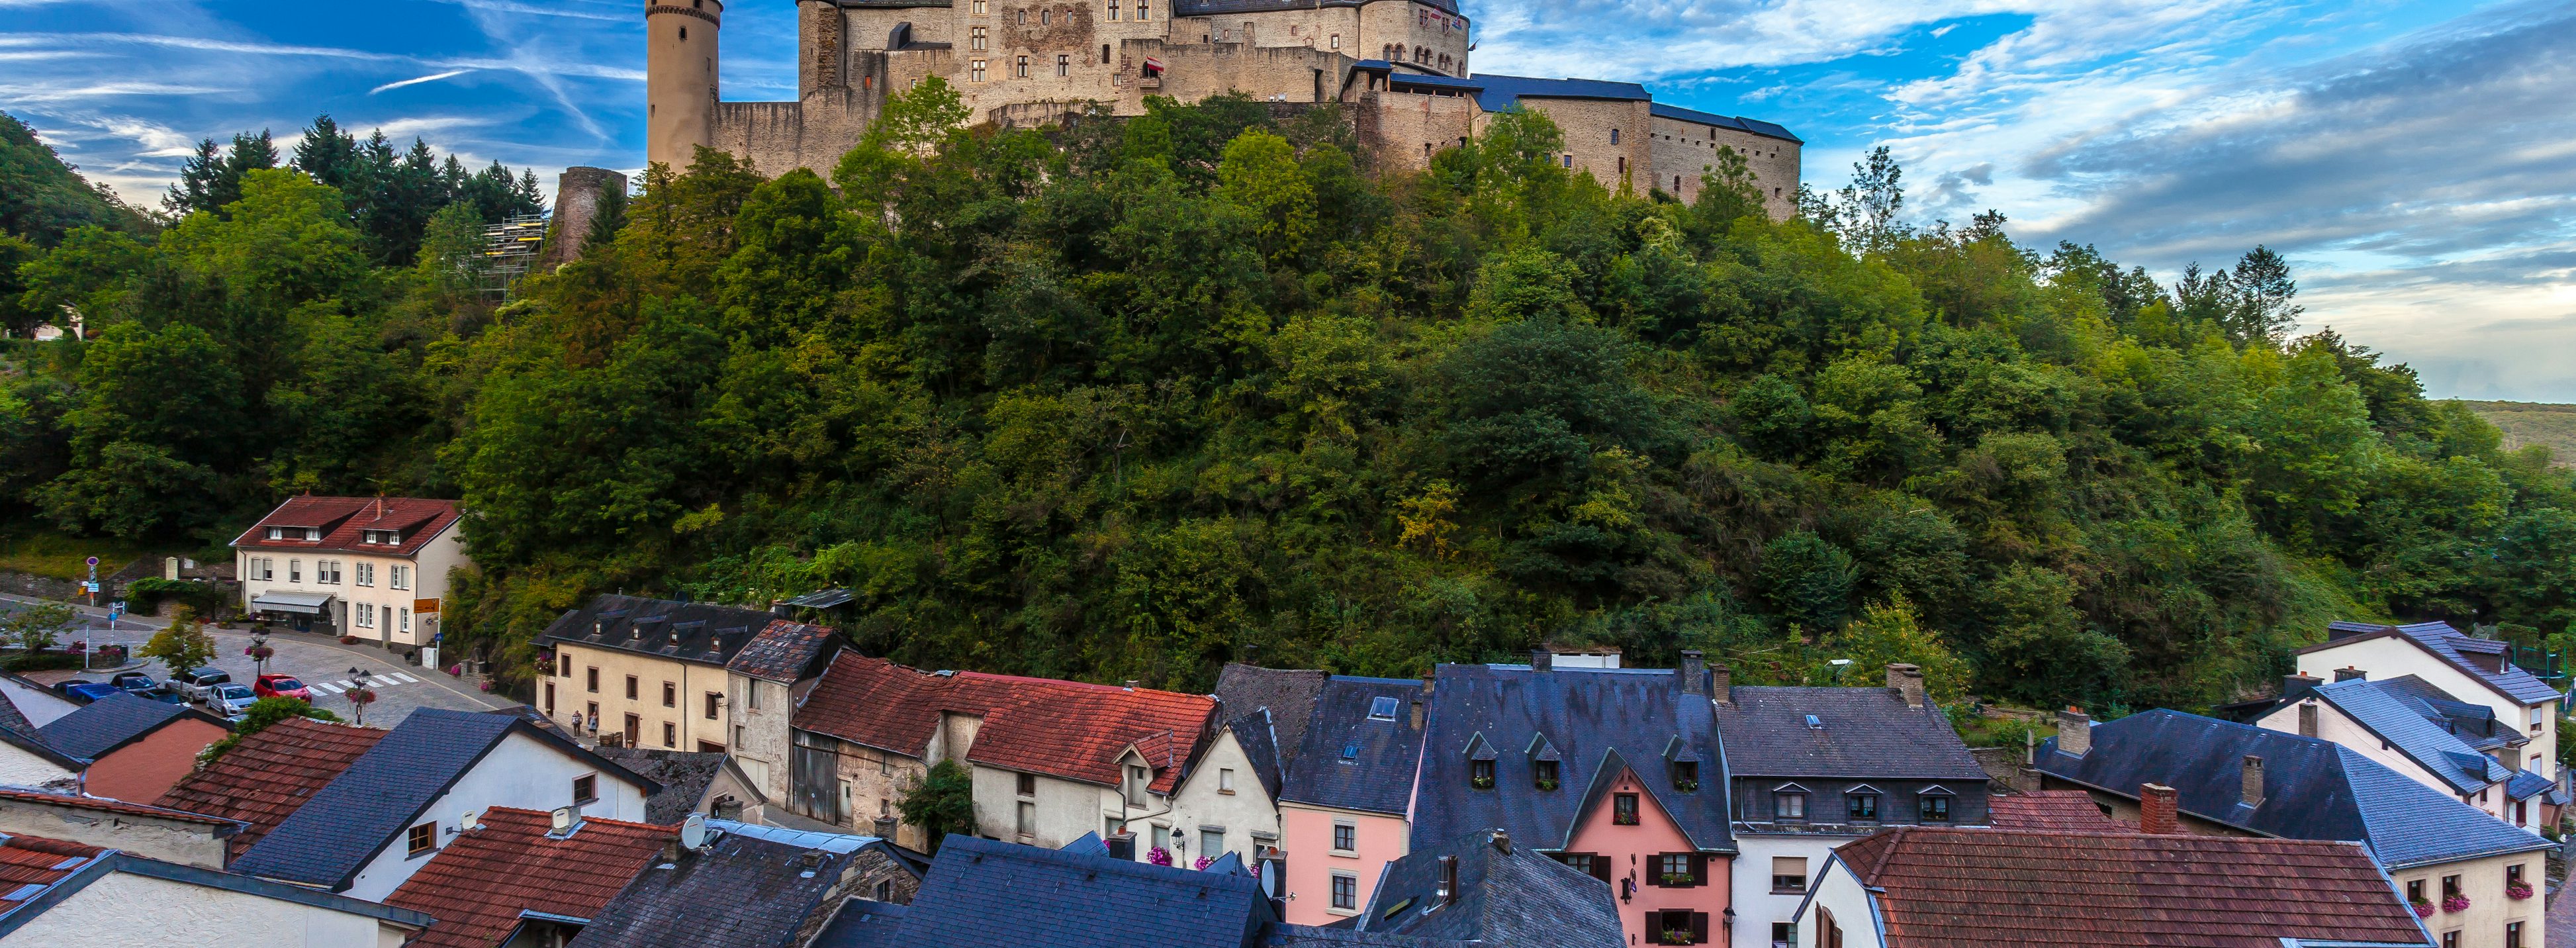 Luxembourg Lonely Planet Travel Guide